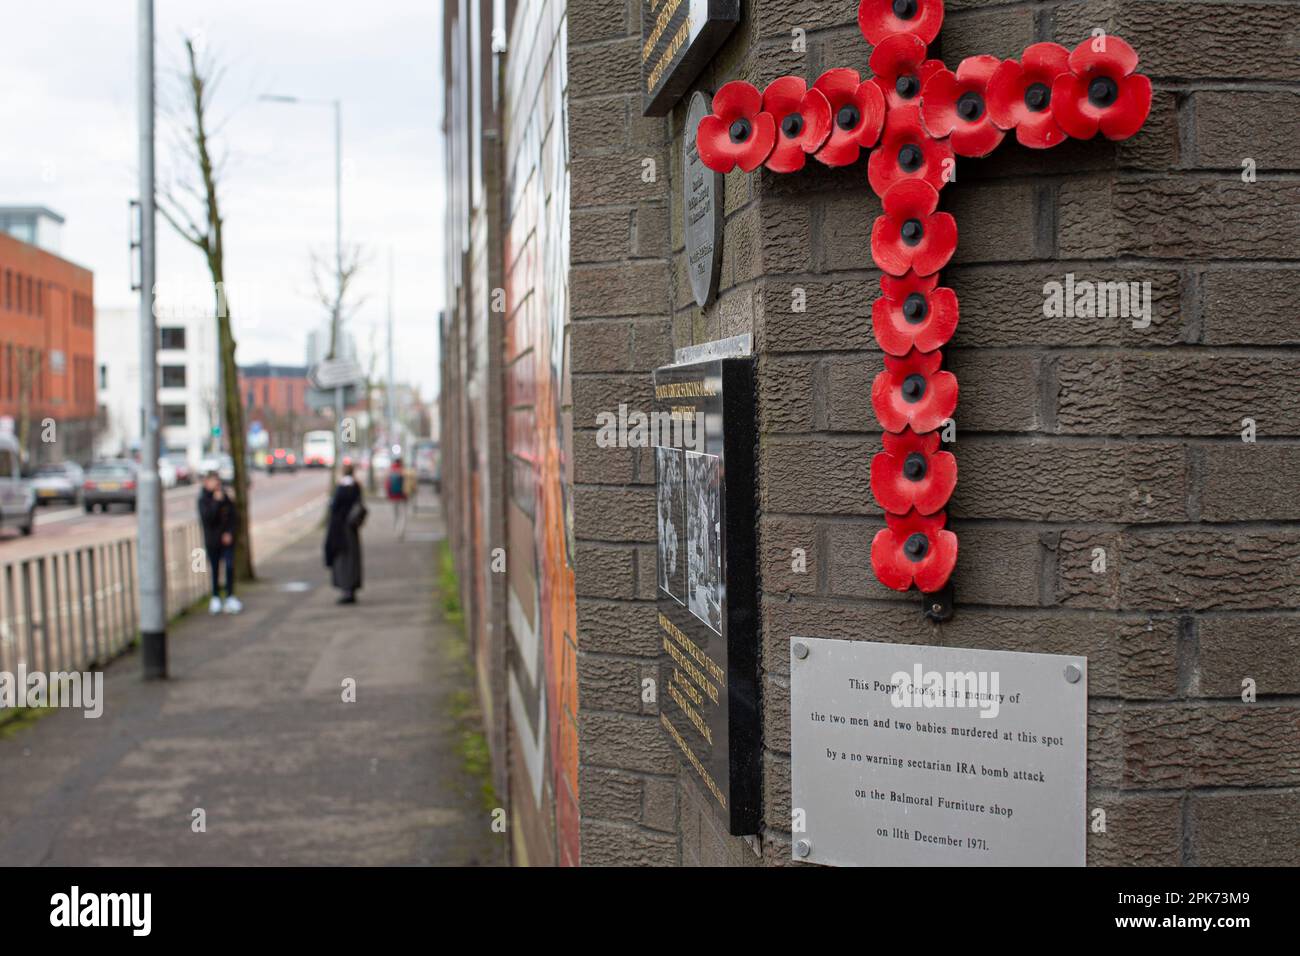 Poppy cross  in memory of the 1971 sectarian IRA bomb attack  at the Shankill Road, Belfast, County Antrim, Northern Ireland, UK Stock Photo